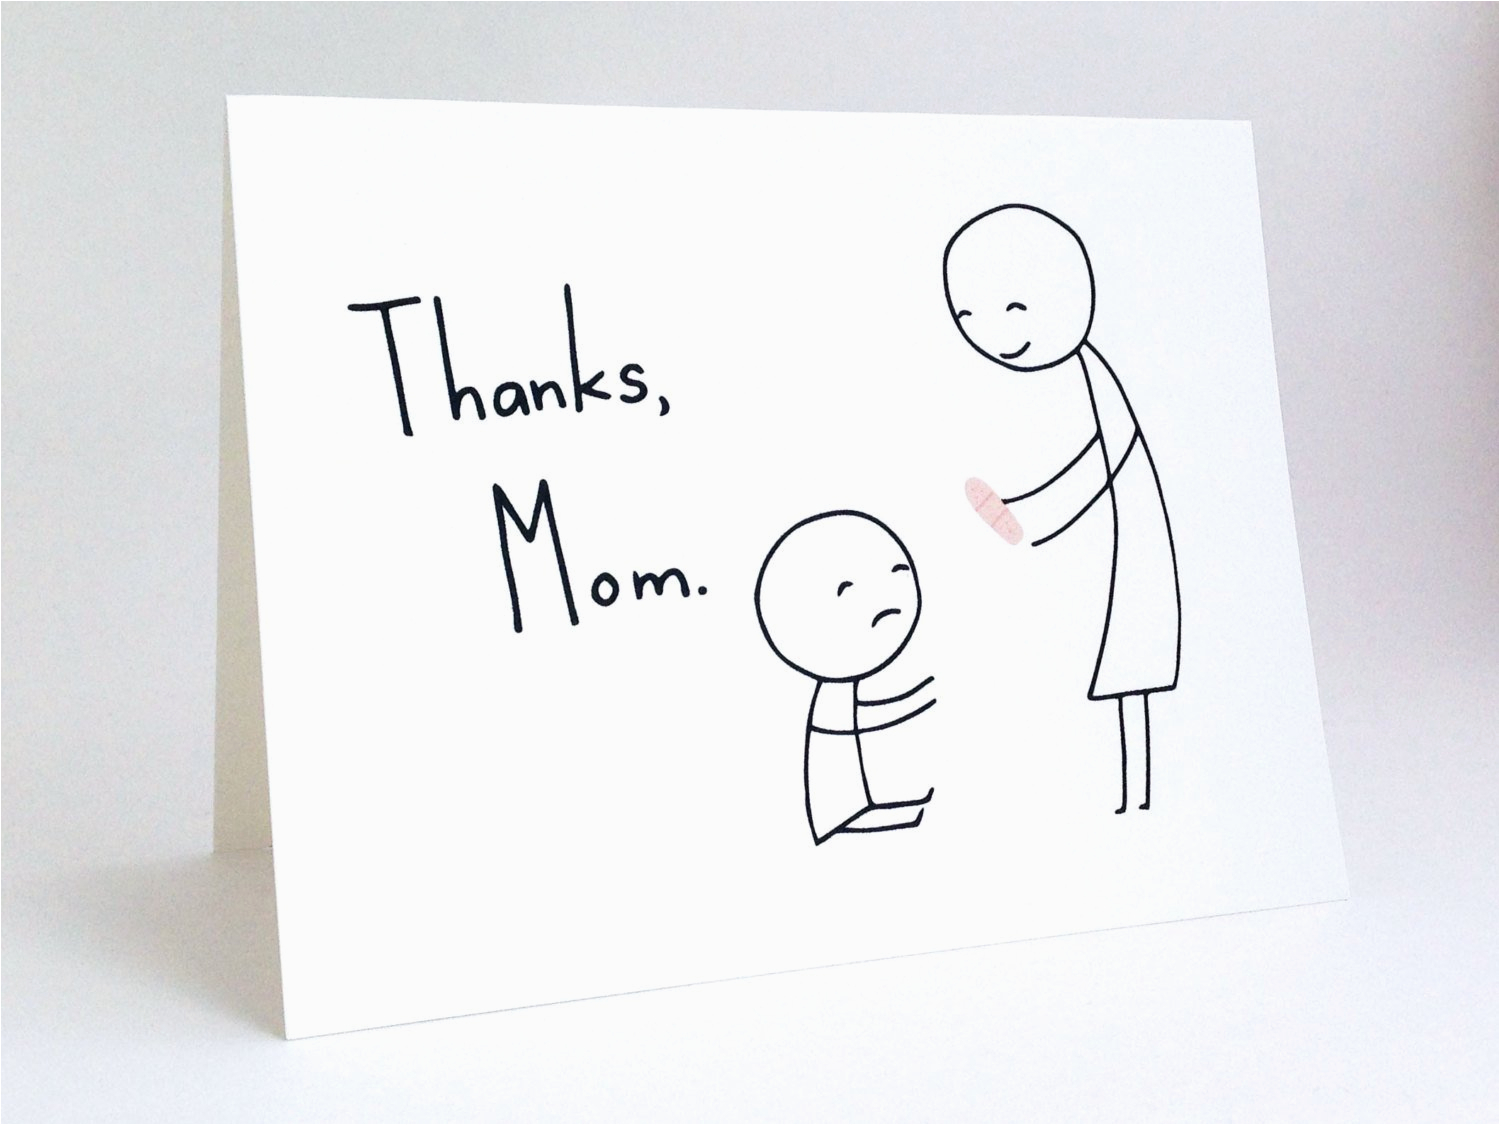 Clever Birthday Card Ideas Funny Birthday Card Ideas For Mom Cute Mother 39 S Day Card Funny